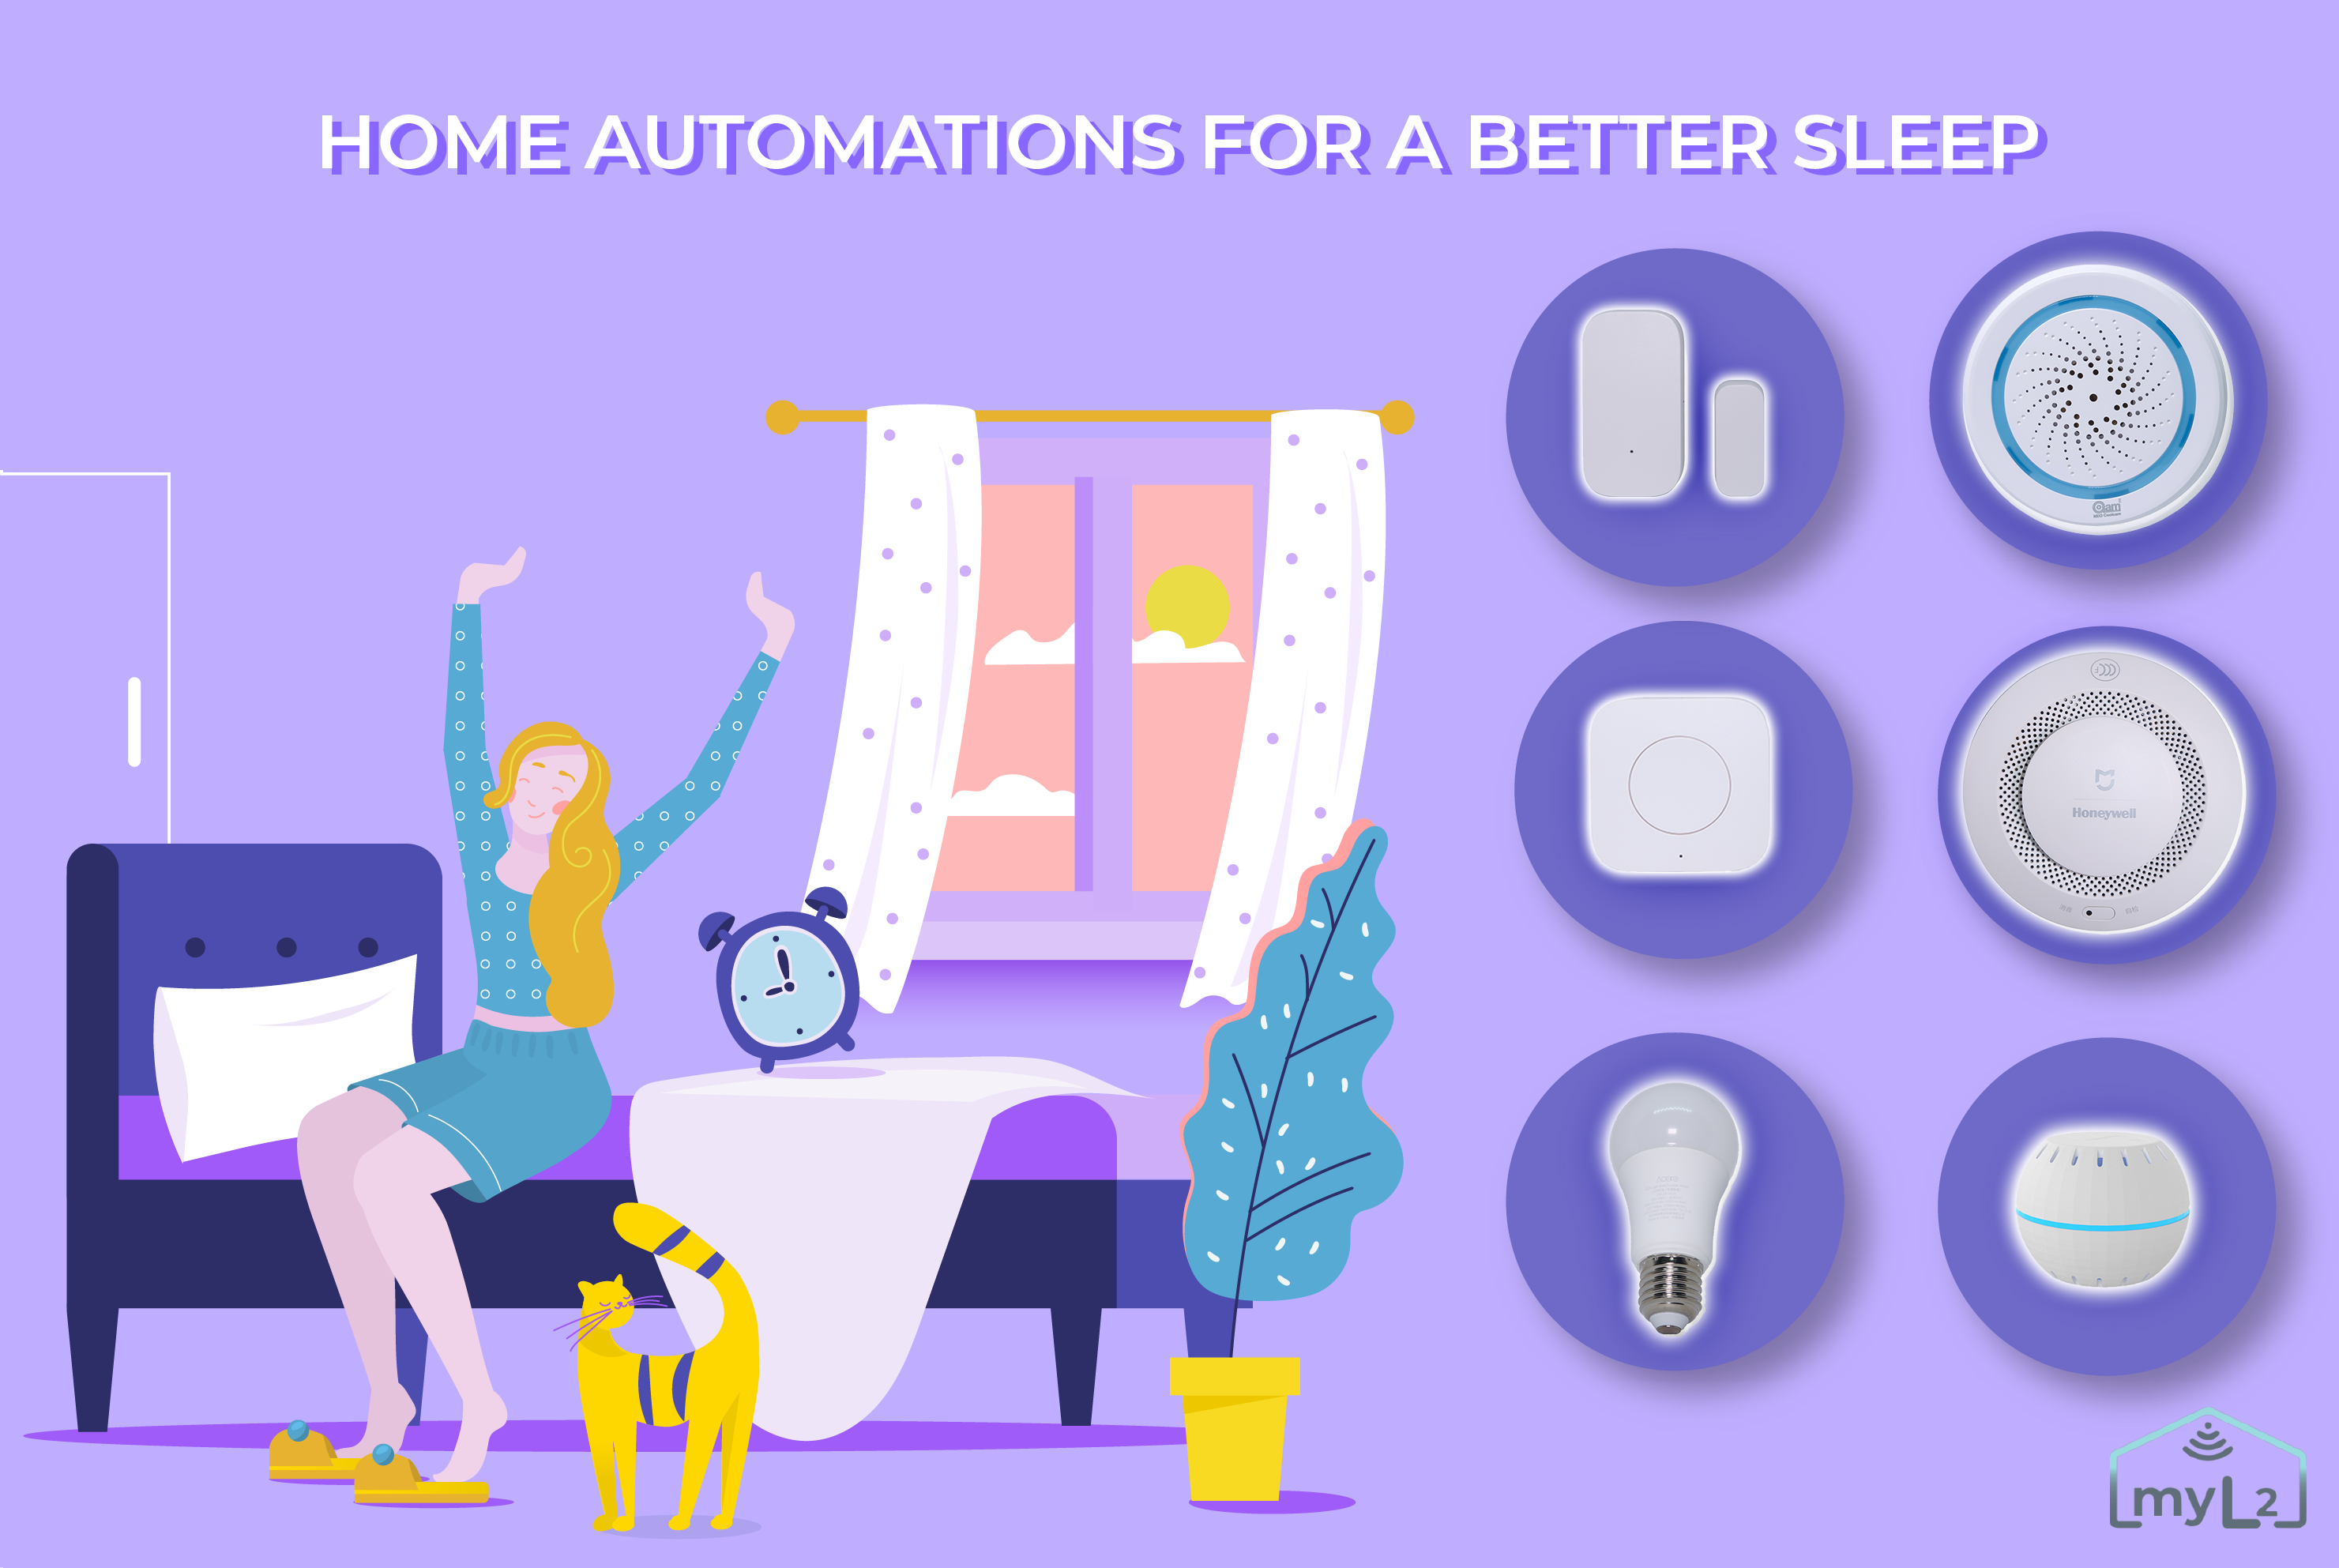 Home Automations for a better sleep